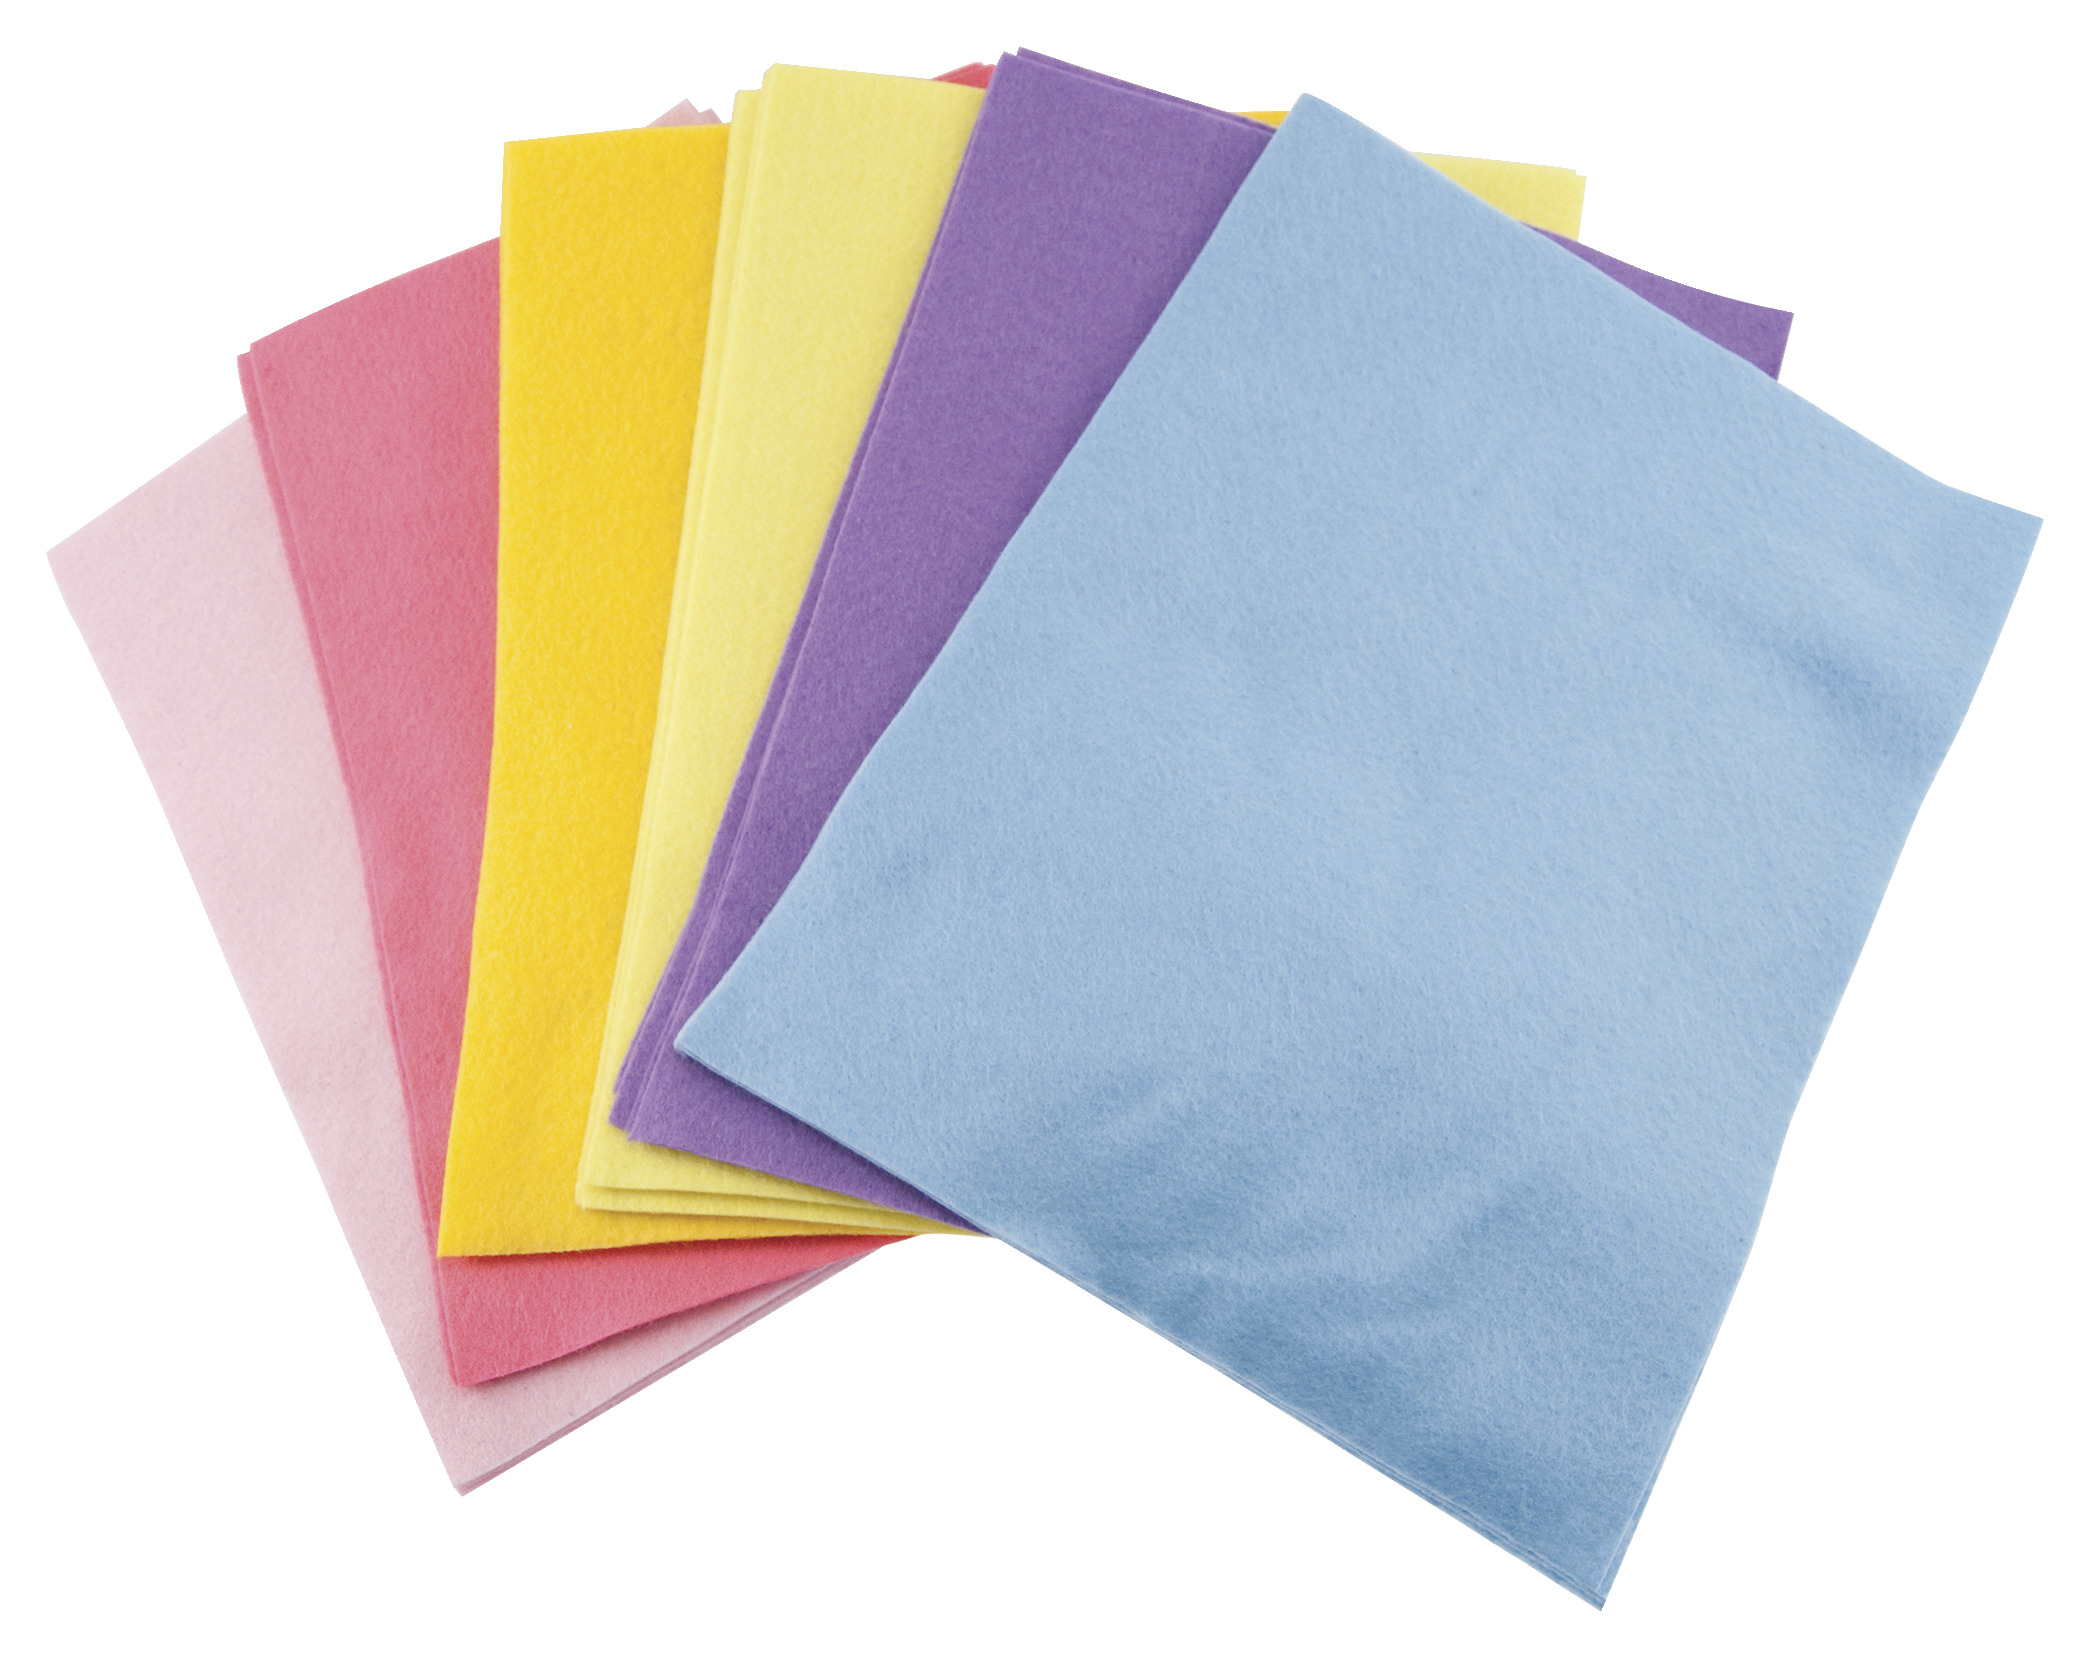 CPE Acrylic Felt Assortment, 9 x 12 Inches, Assorted Pastel Color, Pack of 25 - image 1 of 2